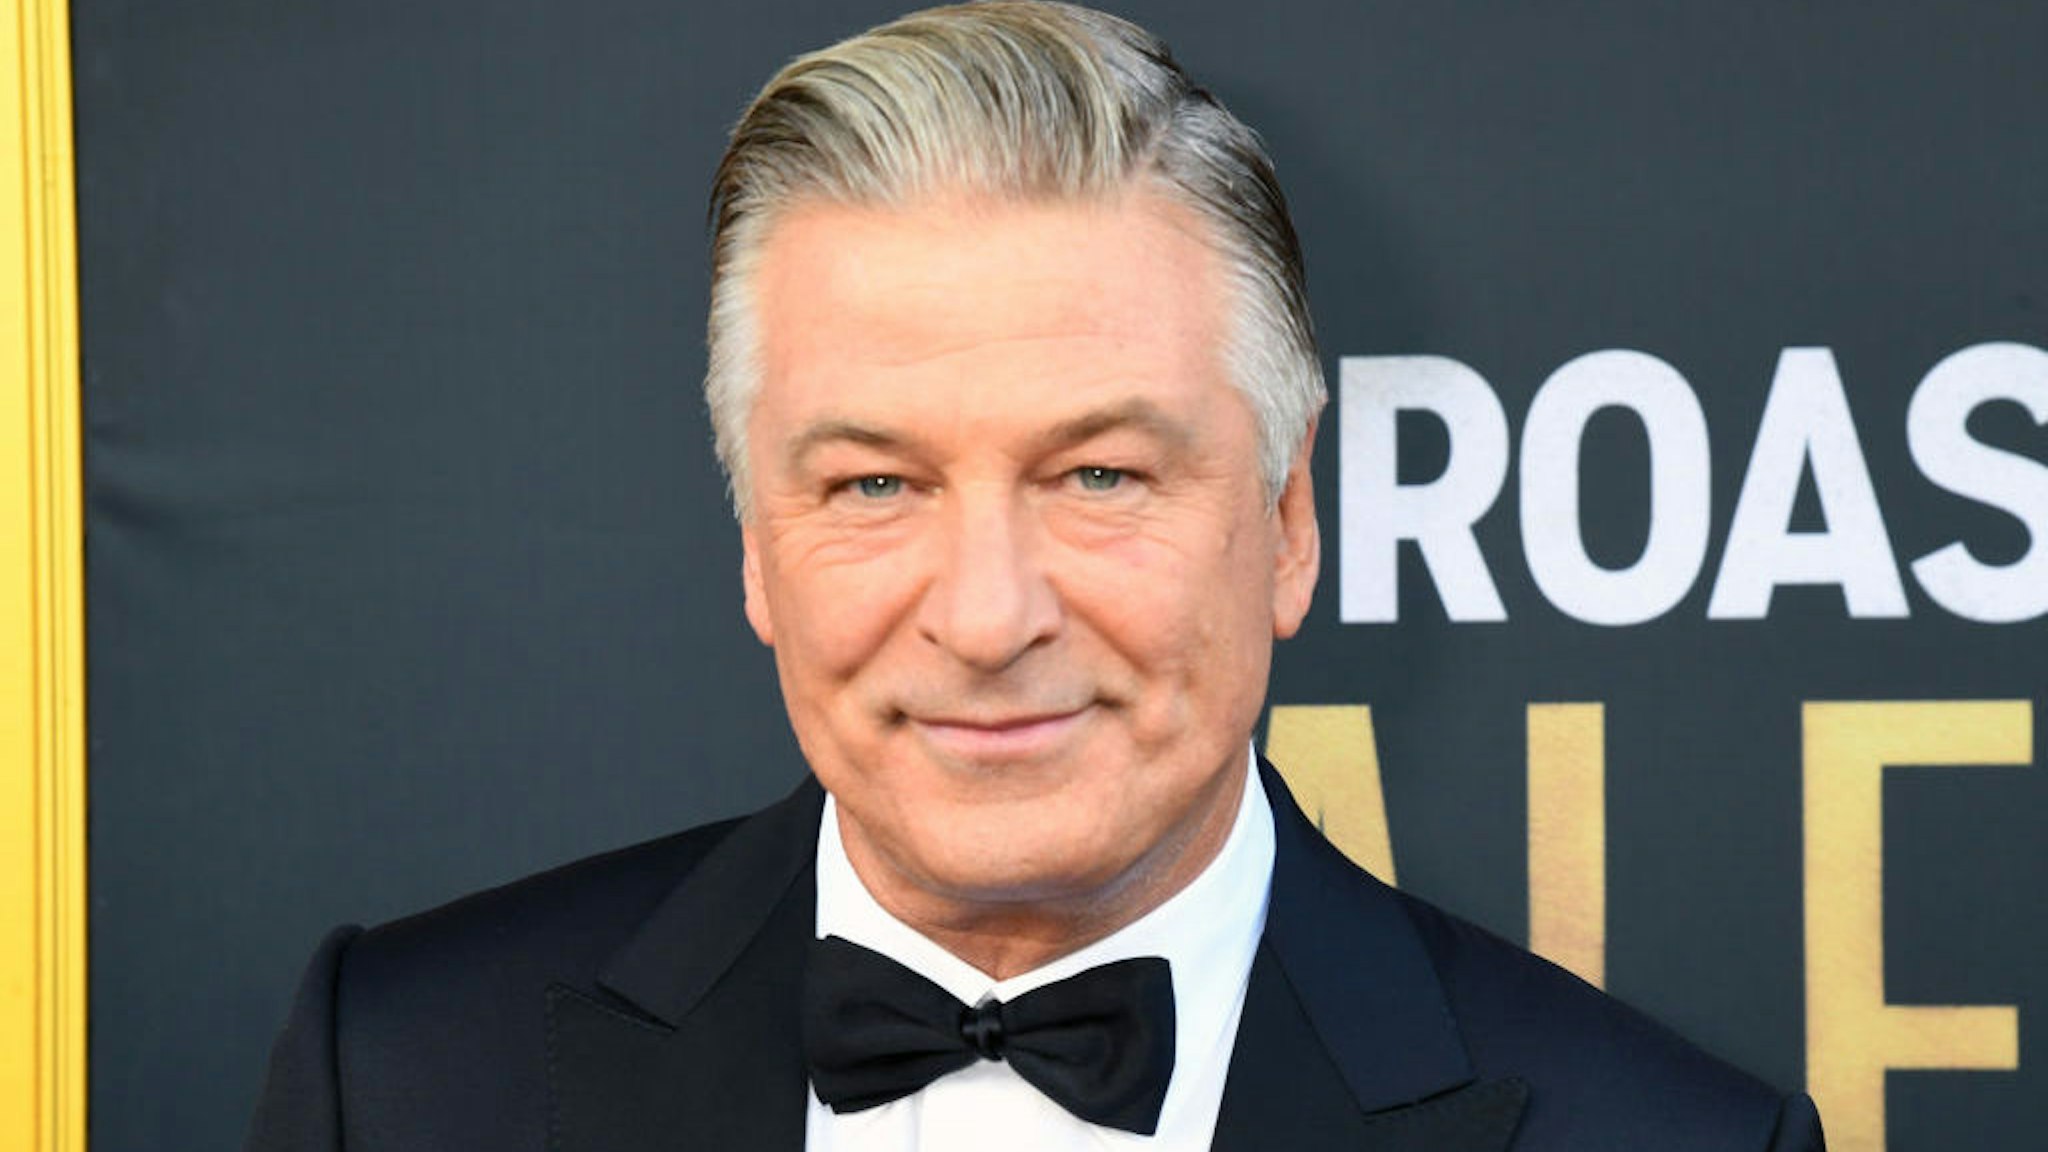 BEVERLY HILLS, CALIFORNIA - SEPTEMBER 07: Alec Baldwin attends the Comedy Central Roast of Alec Baldwin at Saban Theatre on September 07, 2019 in Beverly Hills, California. (Photo by Jeff Kravitz/FilmMagic)